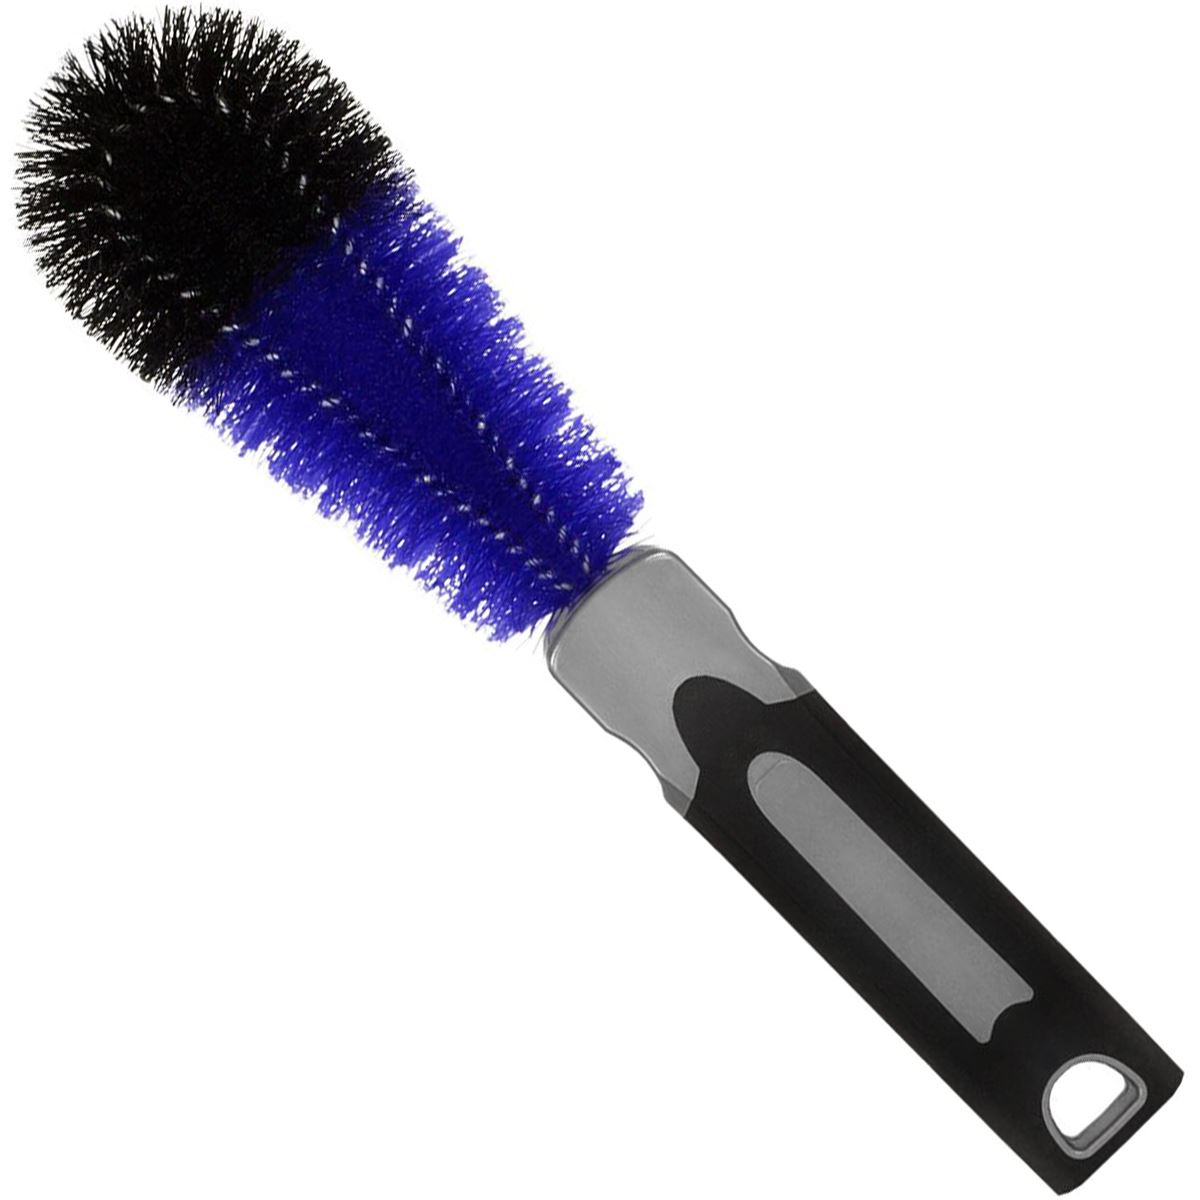 WHEEL BRUSH -green flagged bristles with long handle. Professional  Detailing Products, Because Your Car is a Reflection of You